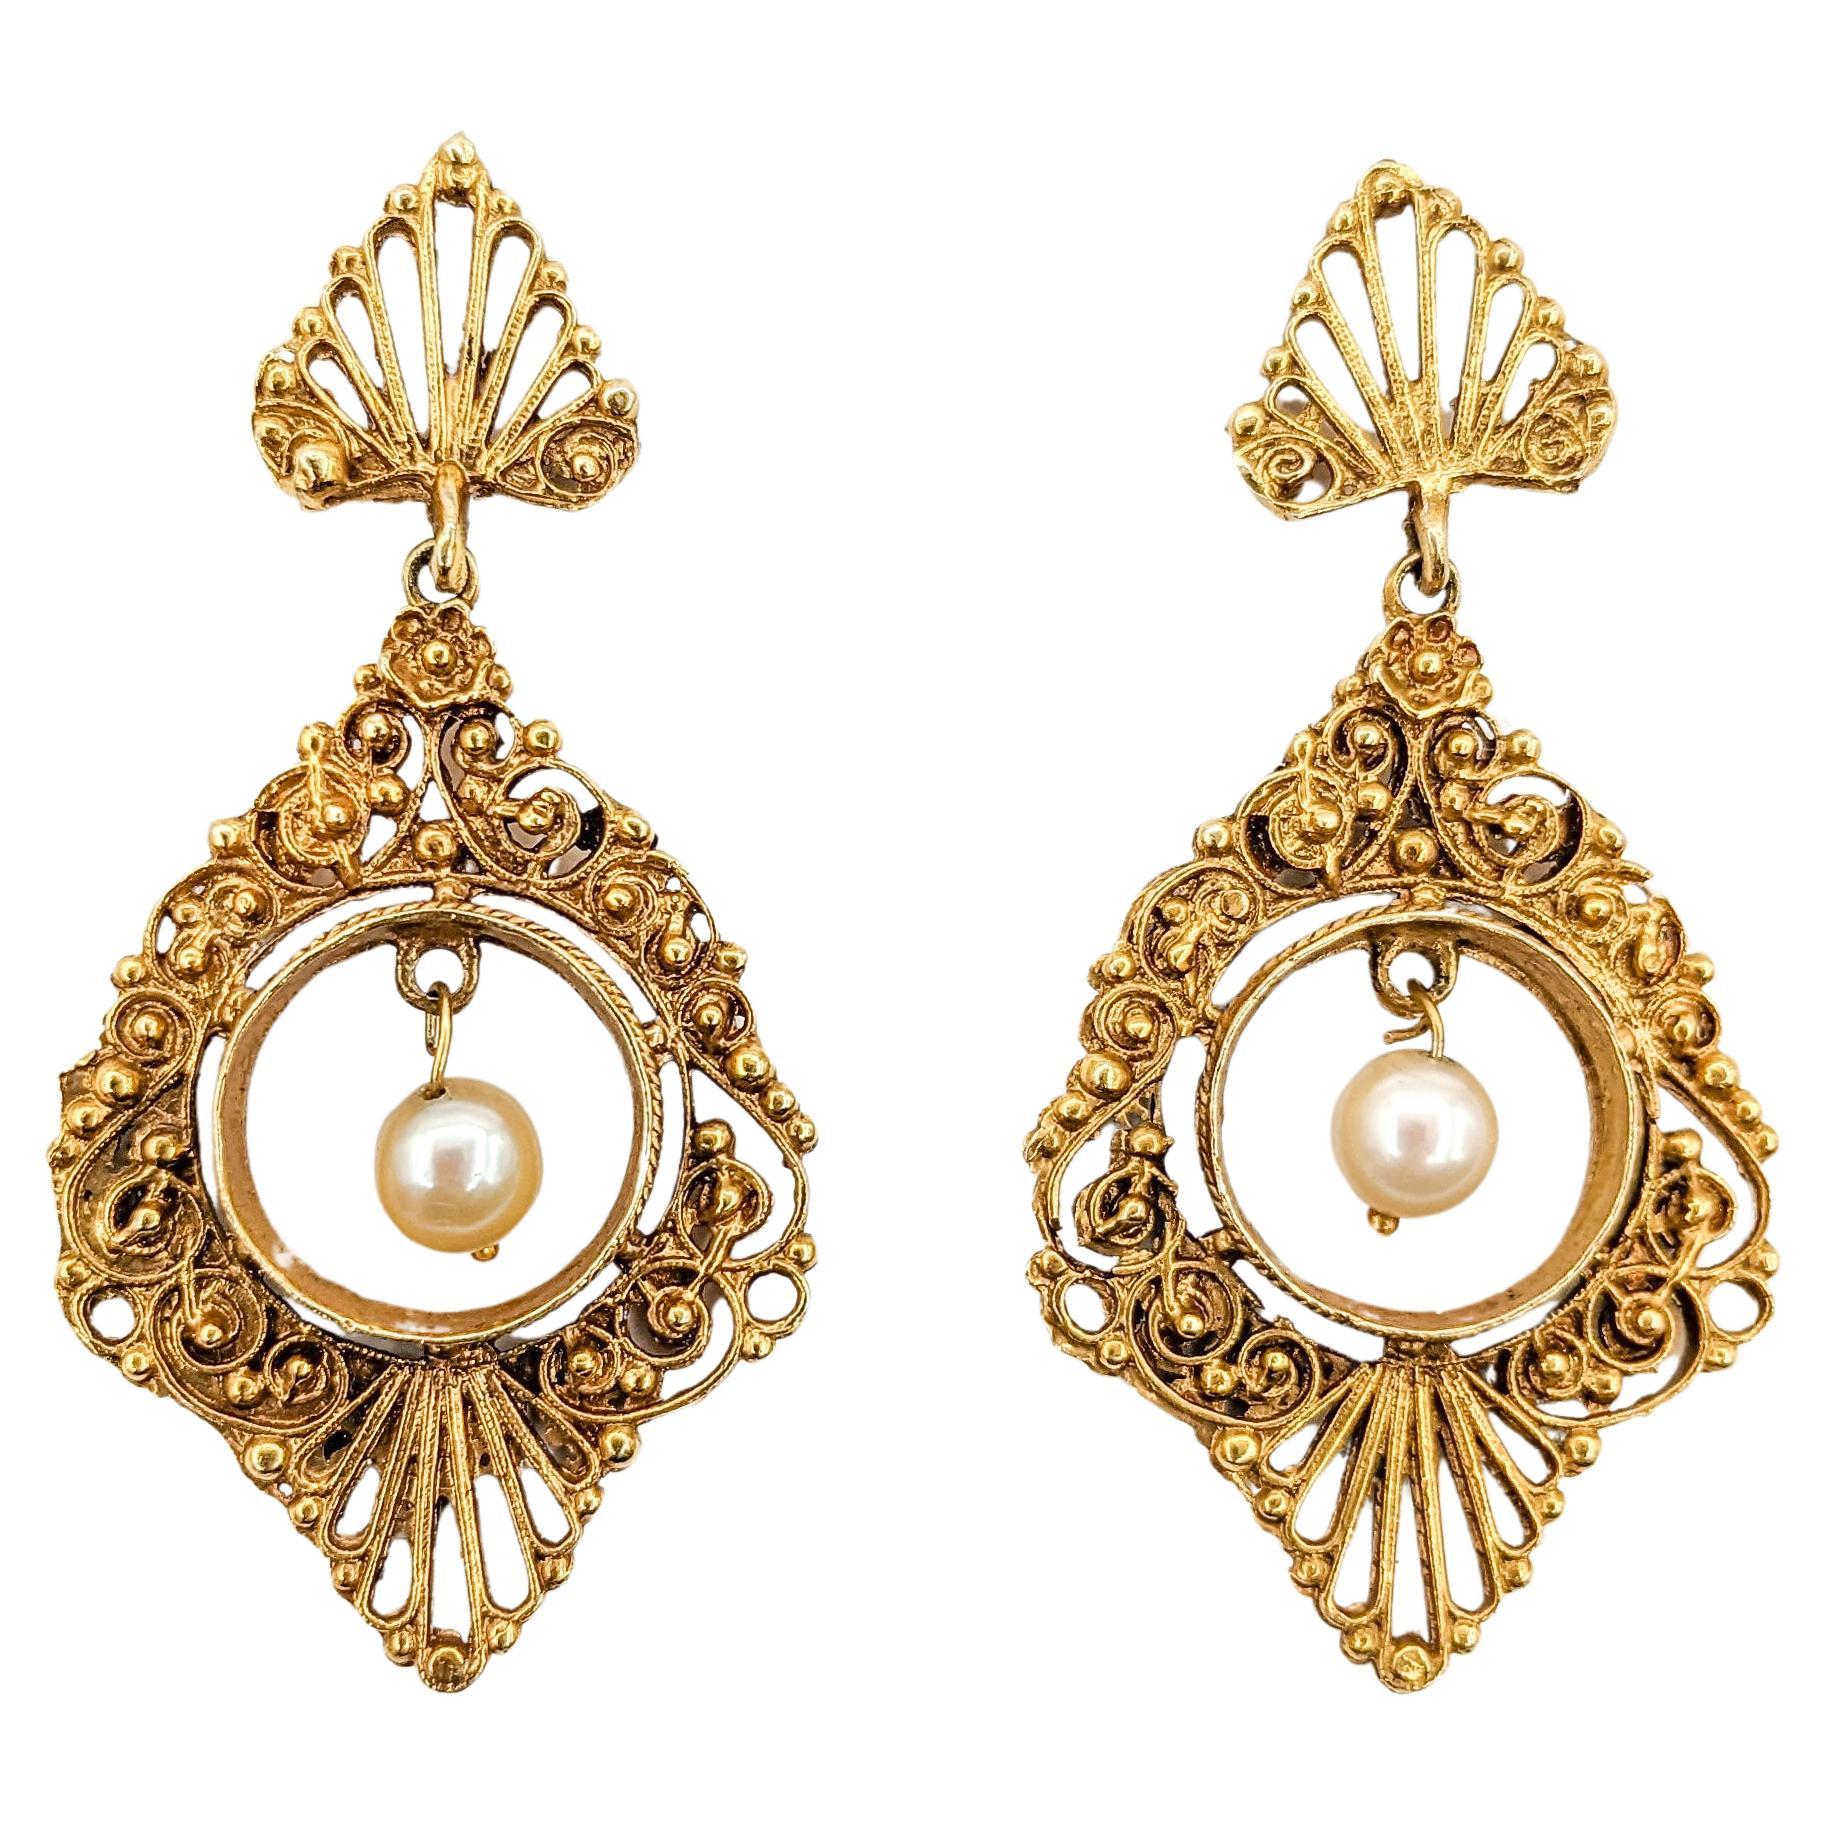 Romantic Vintage Filigree Pearl Drop Earrings in Yellow Gold For Sale